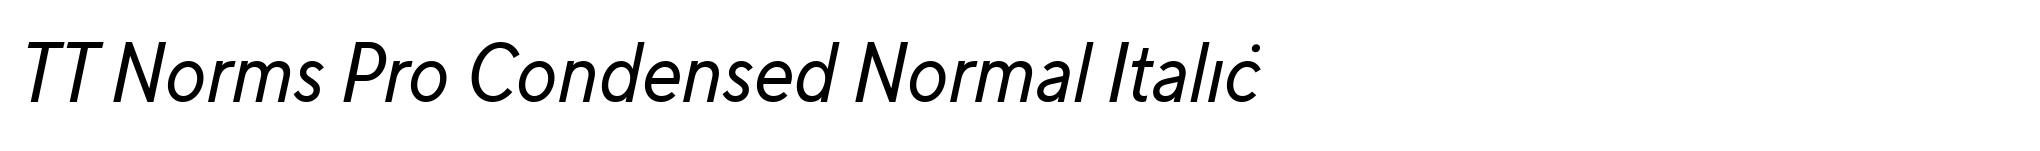 TT Norms Pro Condensed Normal Italic image